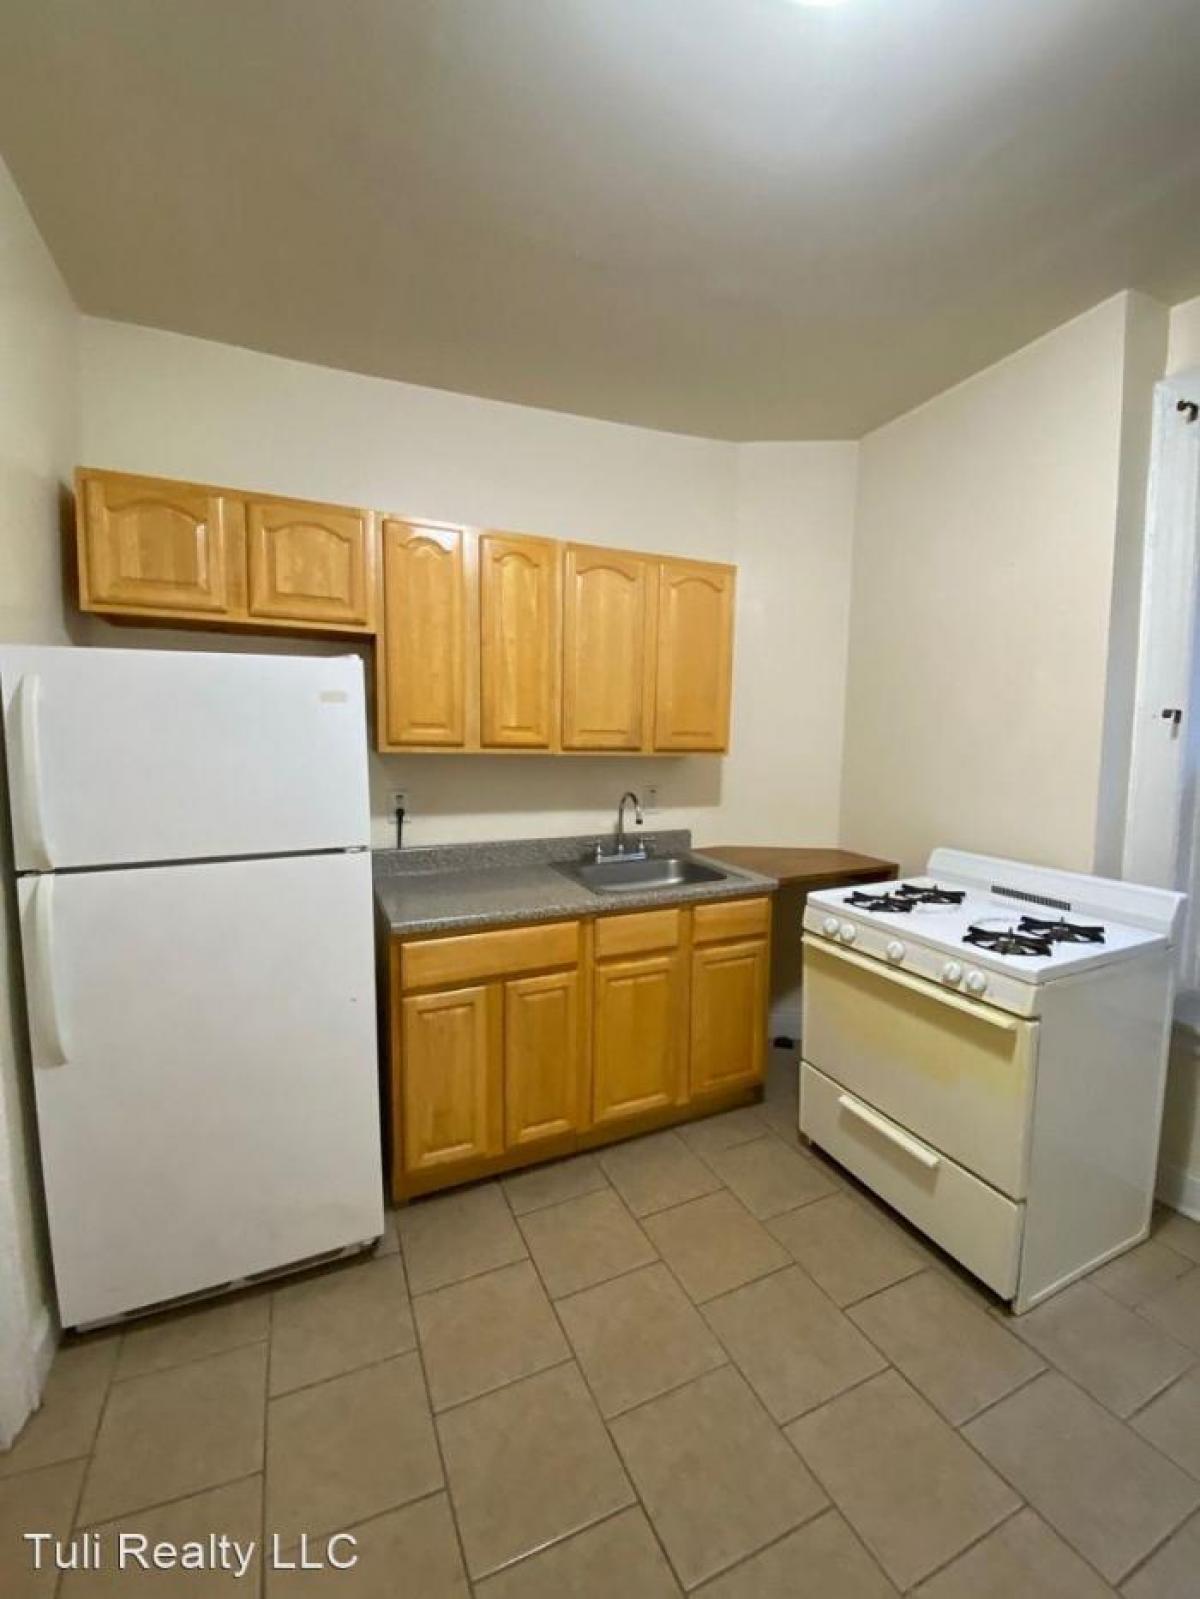 Picture of Apartment For Rent in Weehawken, New Jersey, United States